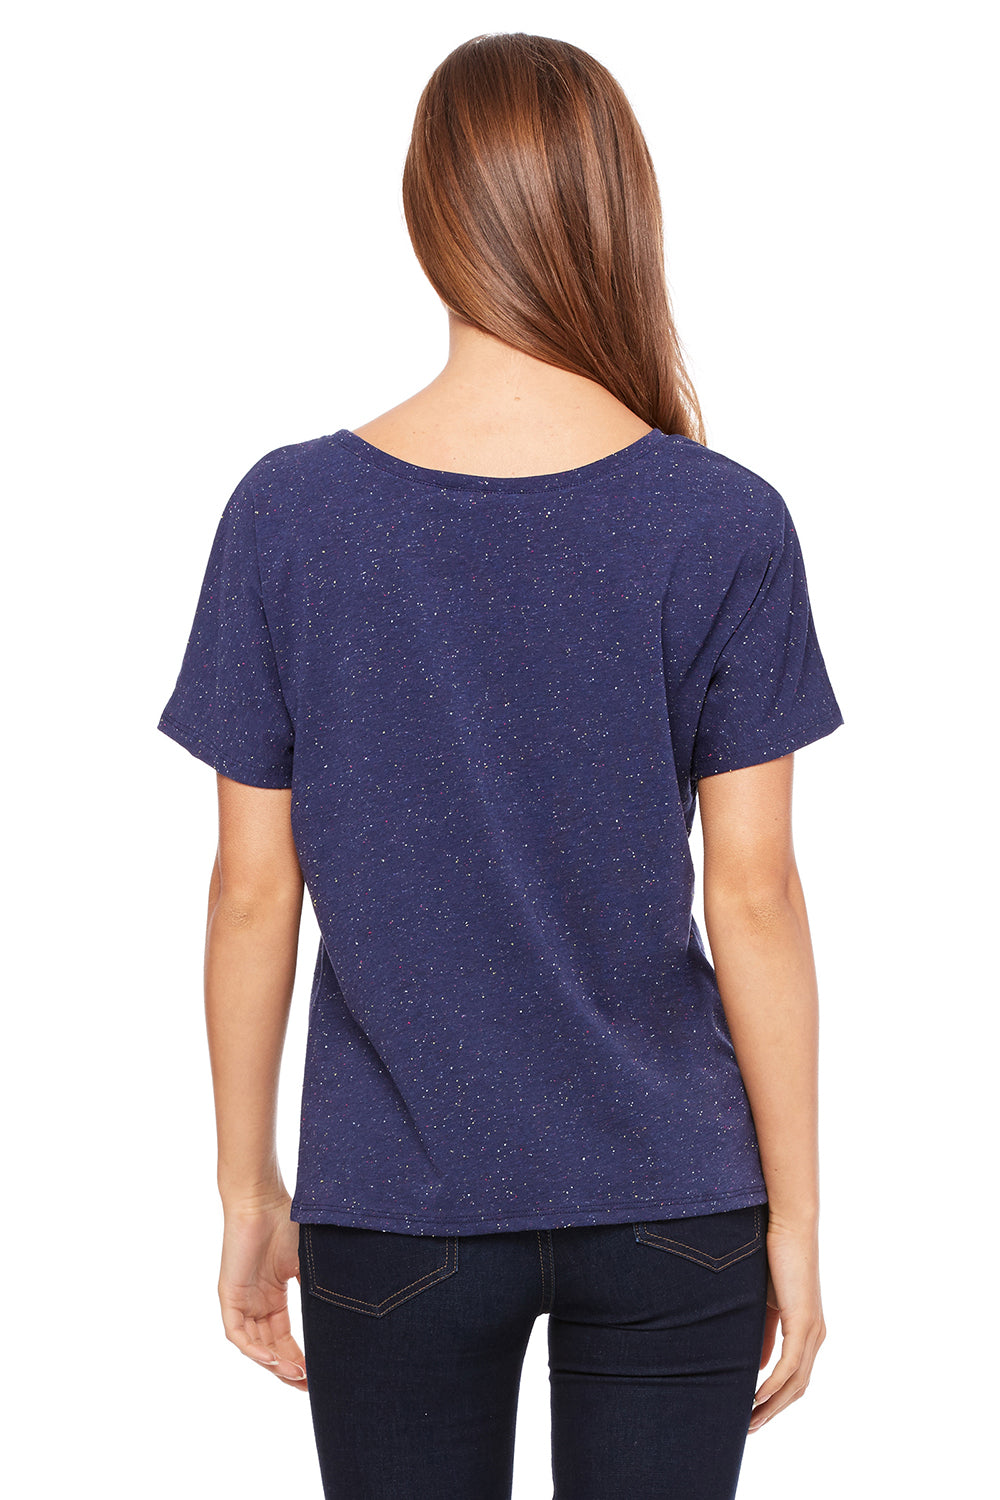 Bella + Canvas BC8816/8816 Womens Slouchy Short Sleeve Wide Neck T-Shirt Navy Blue Speckled Model Back